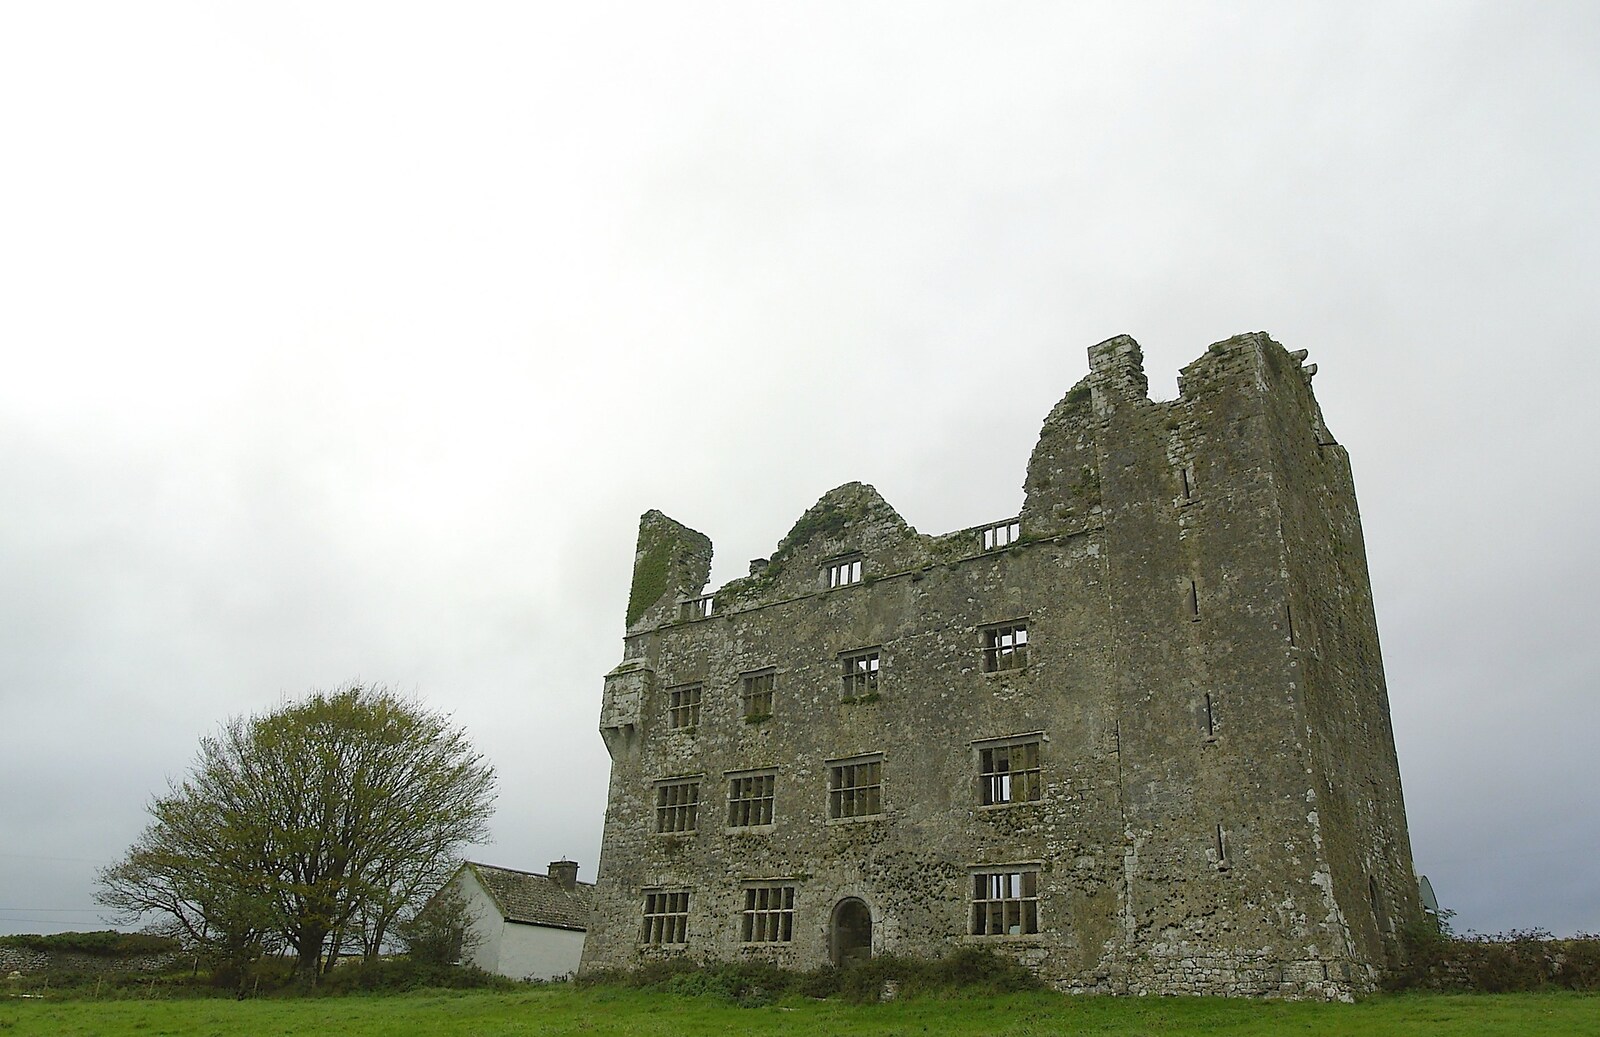 An imposing haunted shell of a once-grand house from Corofin, Ennistymon and The Burran, County Clare, Western Ireland - 27th October 2006